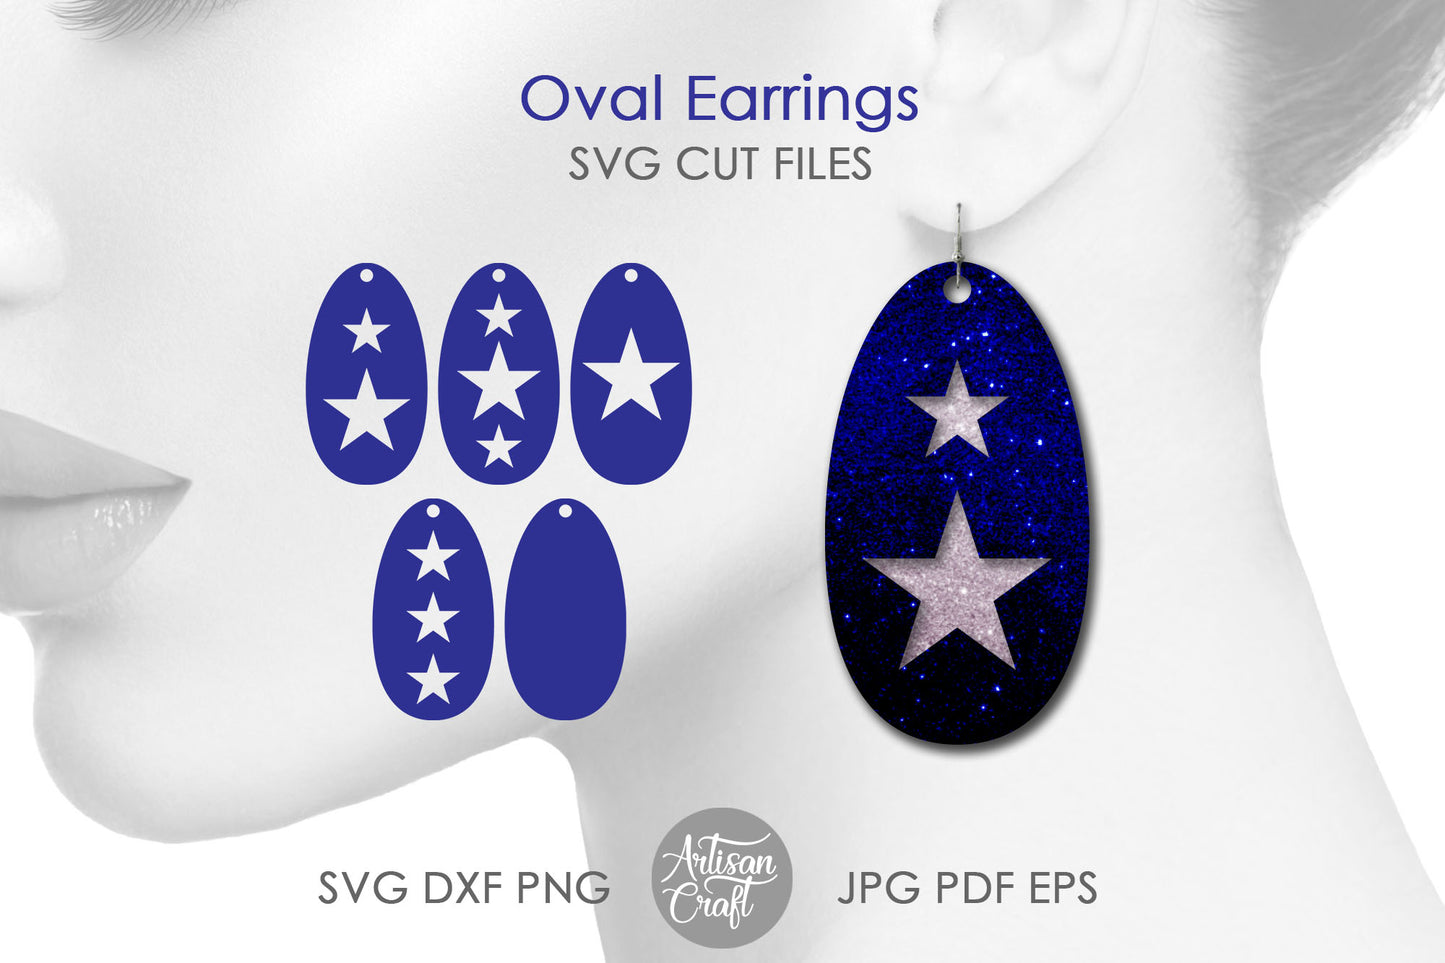 Oval earring SVG with stars cut outs